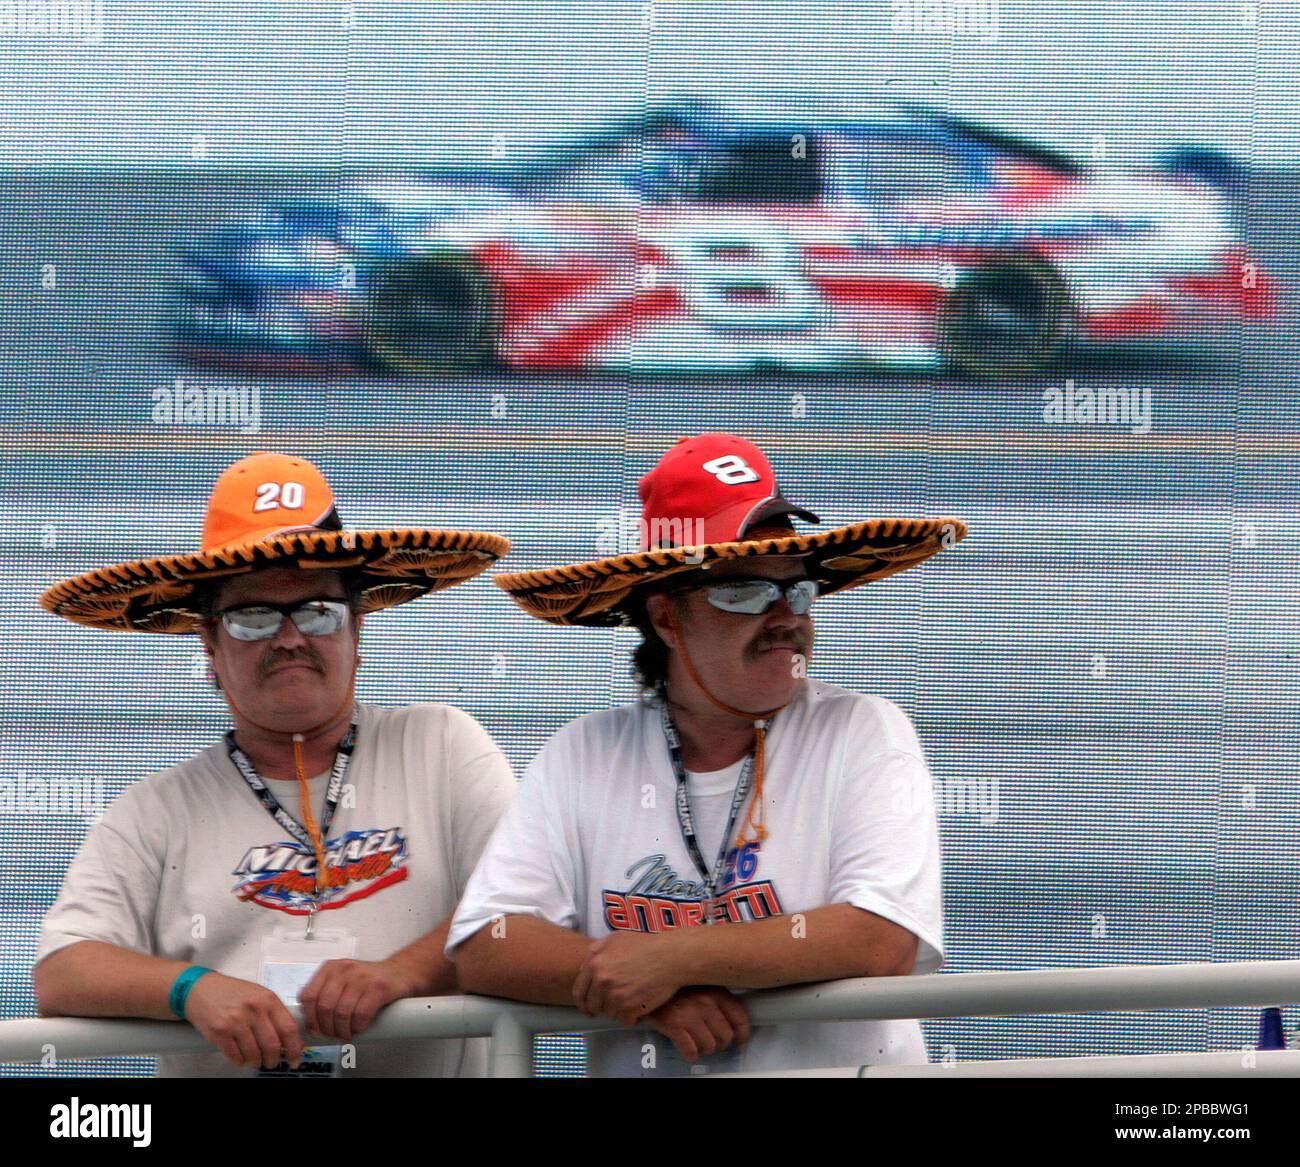 Dennis, left, and Dean Johnson, of Fargo, N.D., watch NASCAR drivers, including Dale Earnhardt Jr., take part in a Pepsi 400 practice Thursday afternoon Juloy 5, 2007 at the Daytona International Speedway